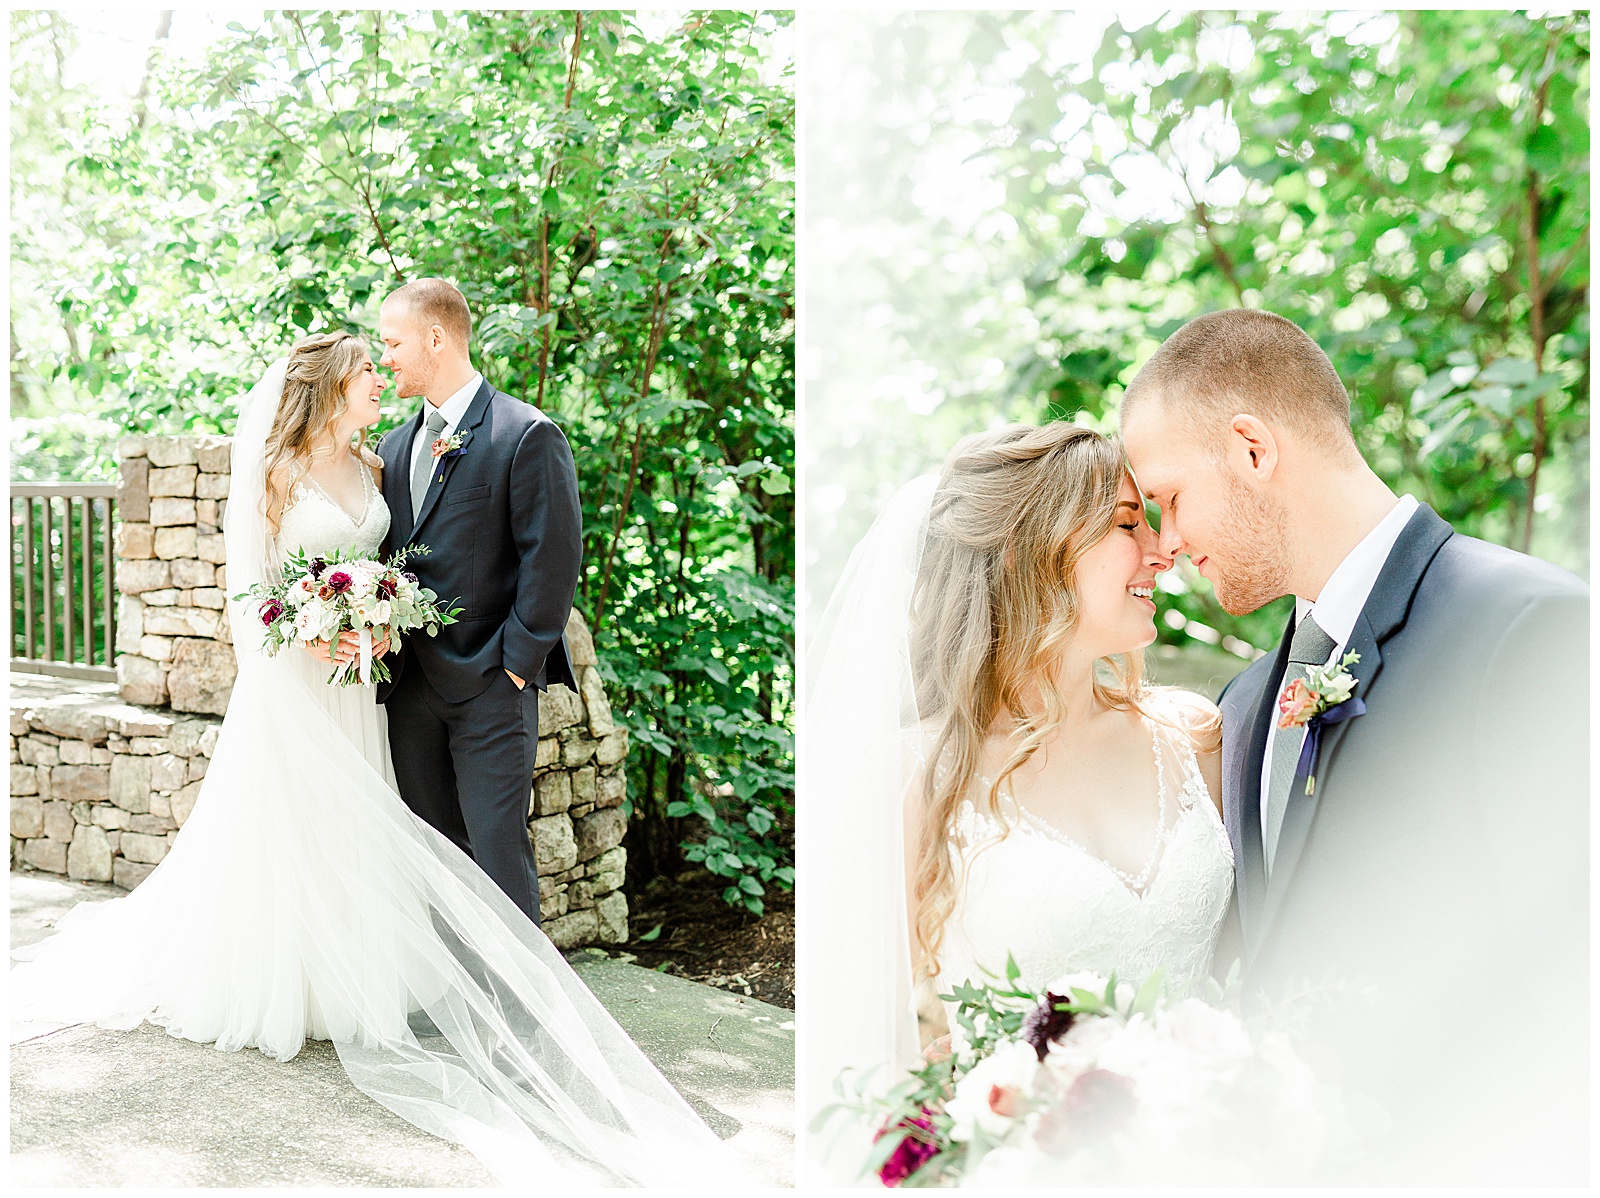 Simple V-Neck Lace wedding dress and dapper groom in blue-gray suit from Elegant Modern Summer Wedding in Charlotte, NC | check out the full wedding at KevynDixonPhoto.com